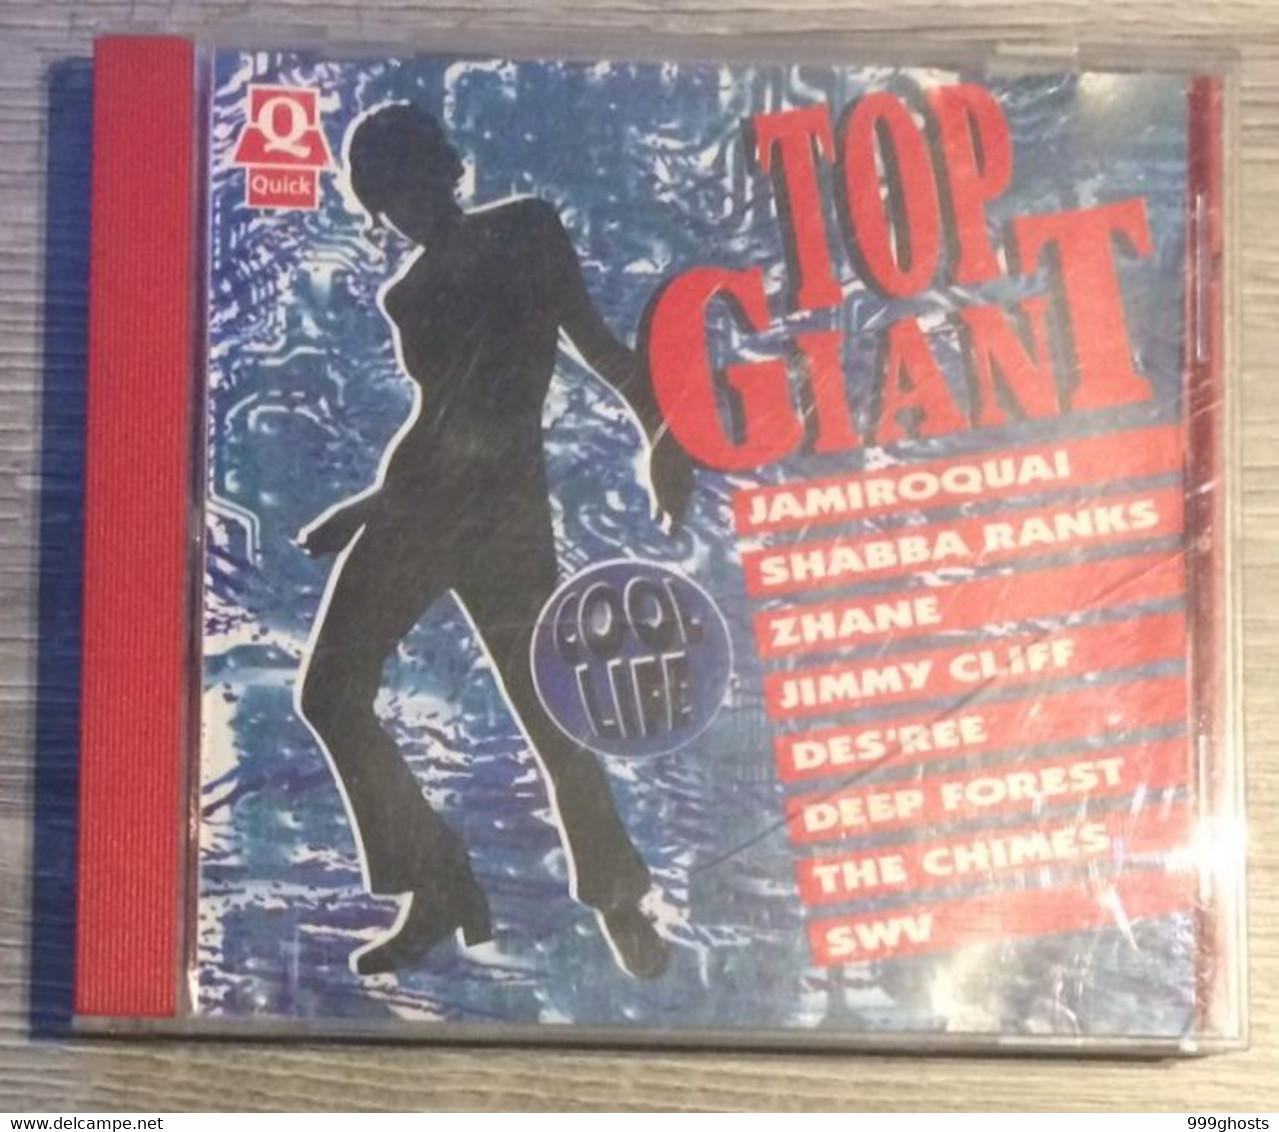 QUICK CD TOP GAINT (Case Damaged, CD Good) JAMIROQUAI SHABBA RANKS ZHANE JIMMY CLIFF DES'REE DEEP FOREST THE CHIMES SWV - Compilations